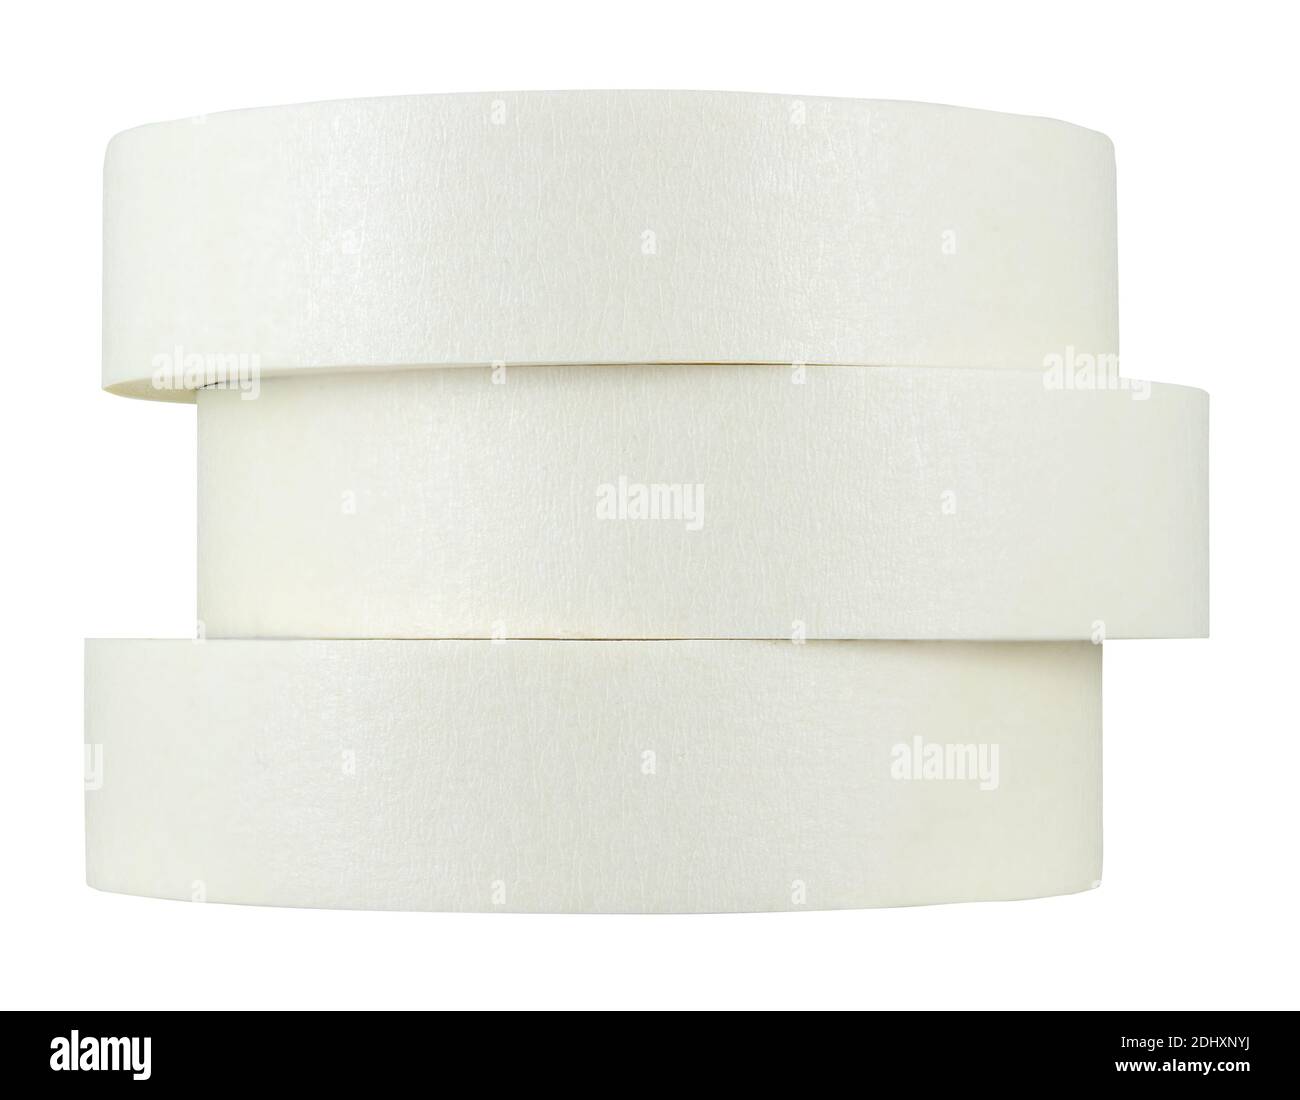 Three Rolls Of Masking Tape (Or Painter's Tape) Isolated On A White Background Stock Photo